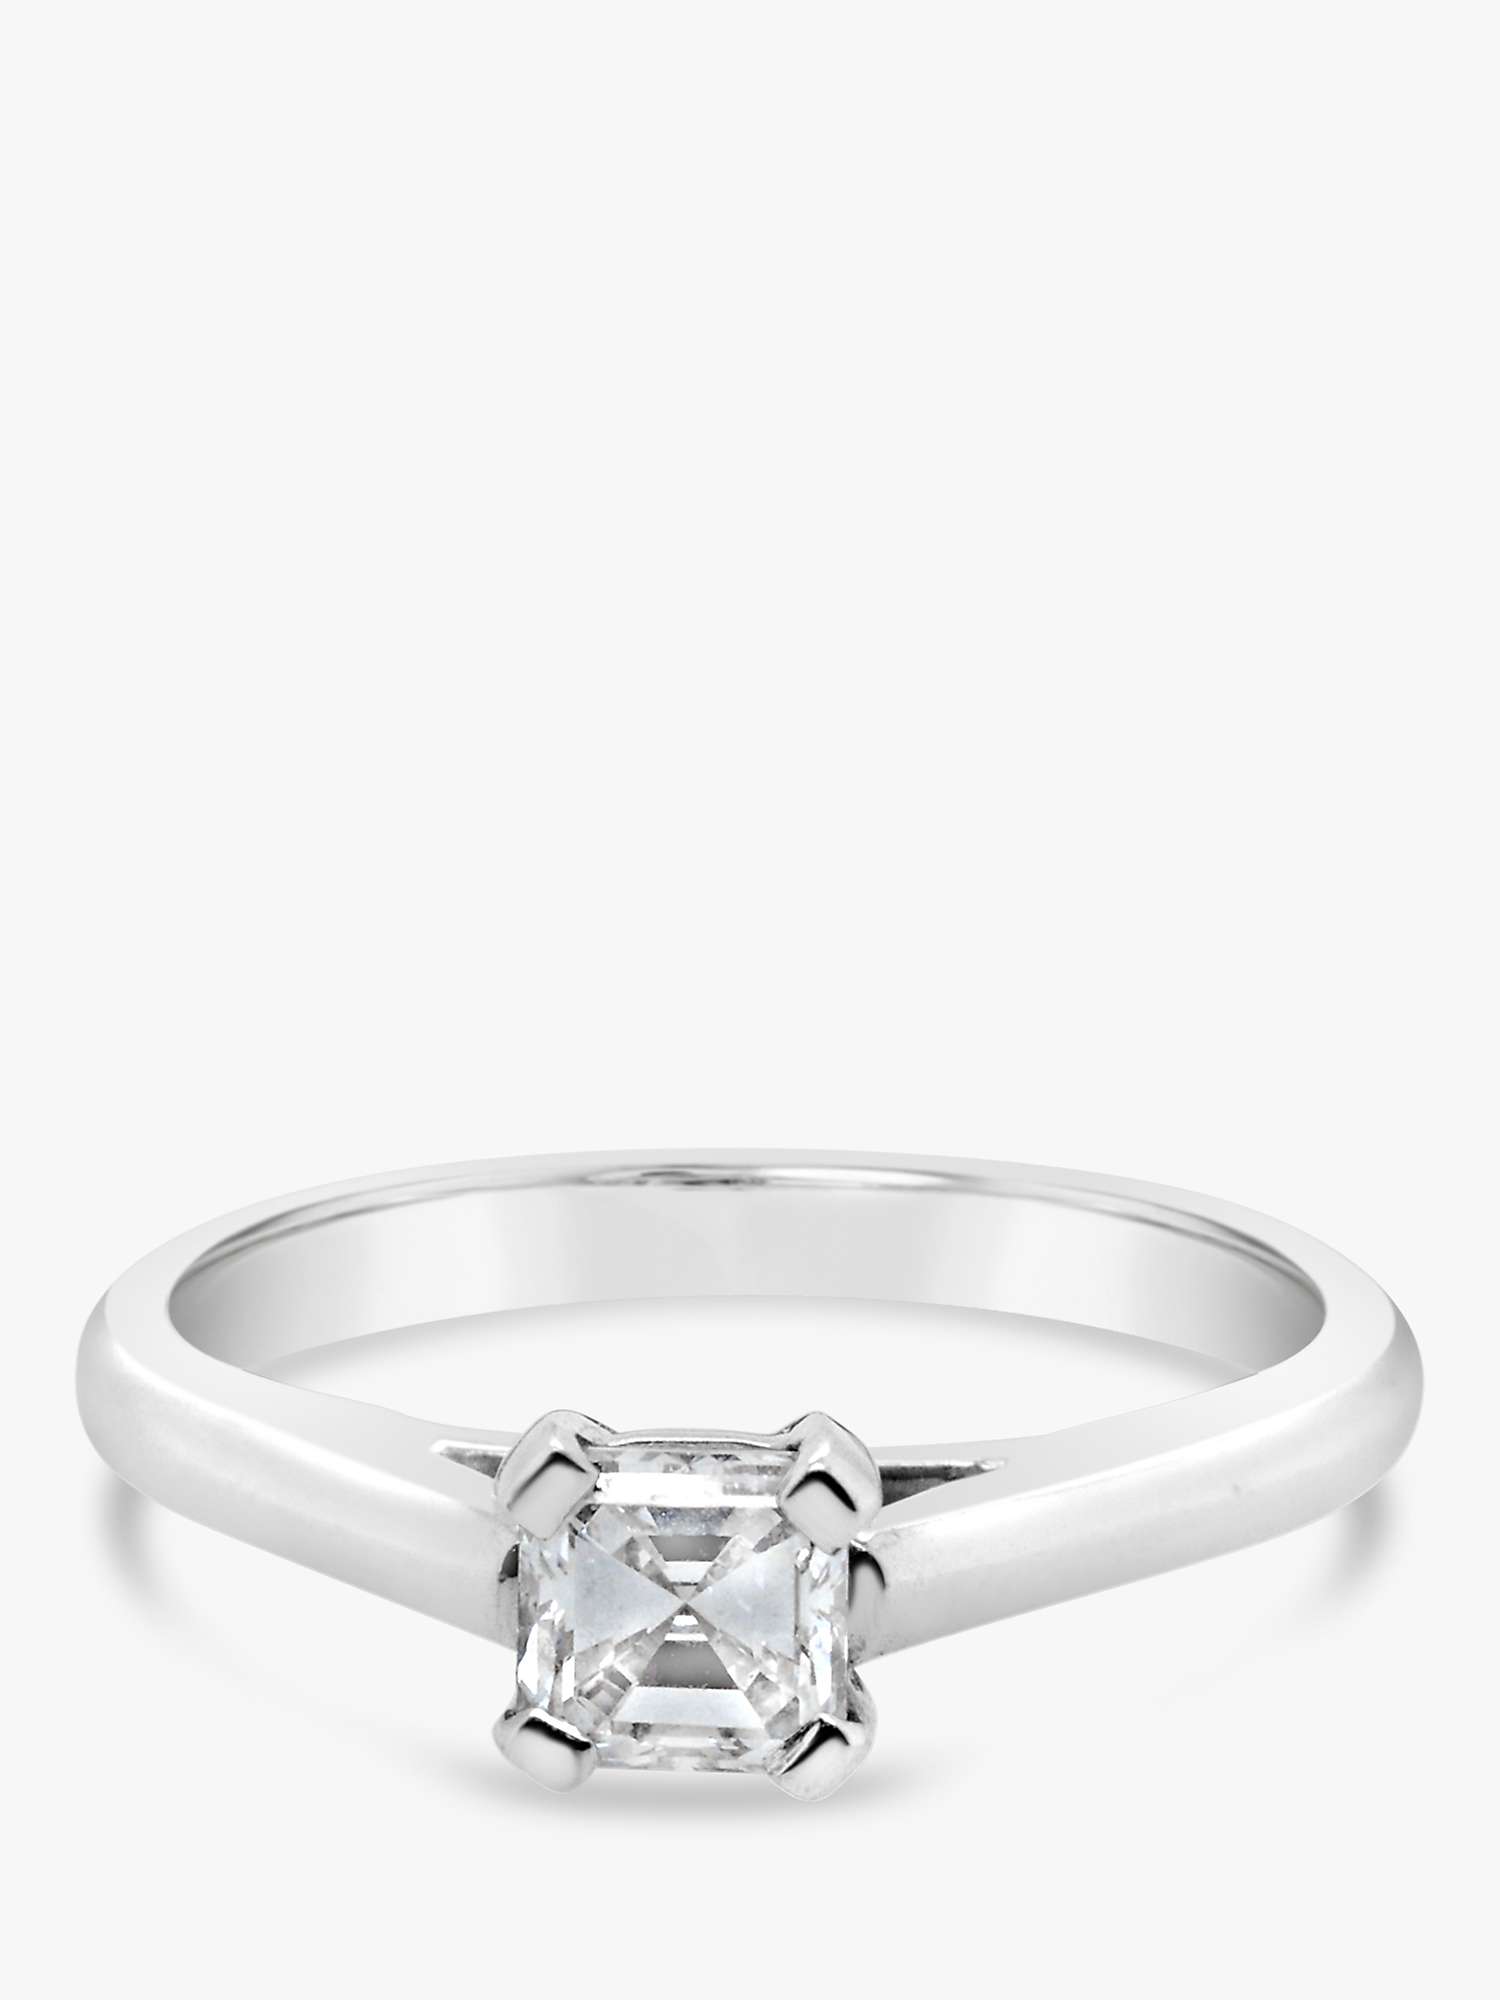 Buy Milton & Humble Jewellery Second Hand 18ct White Gold Emerald Cut Diamond Engagement Ring Online at johnlewis.com